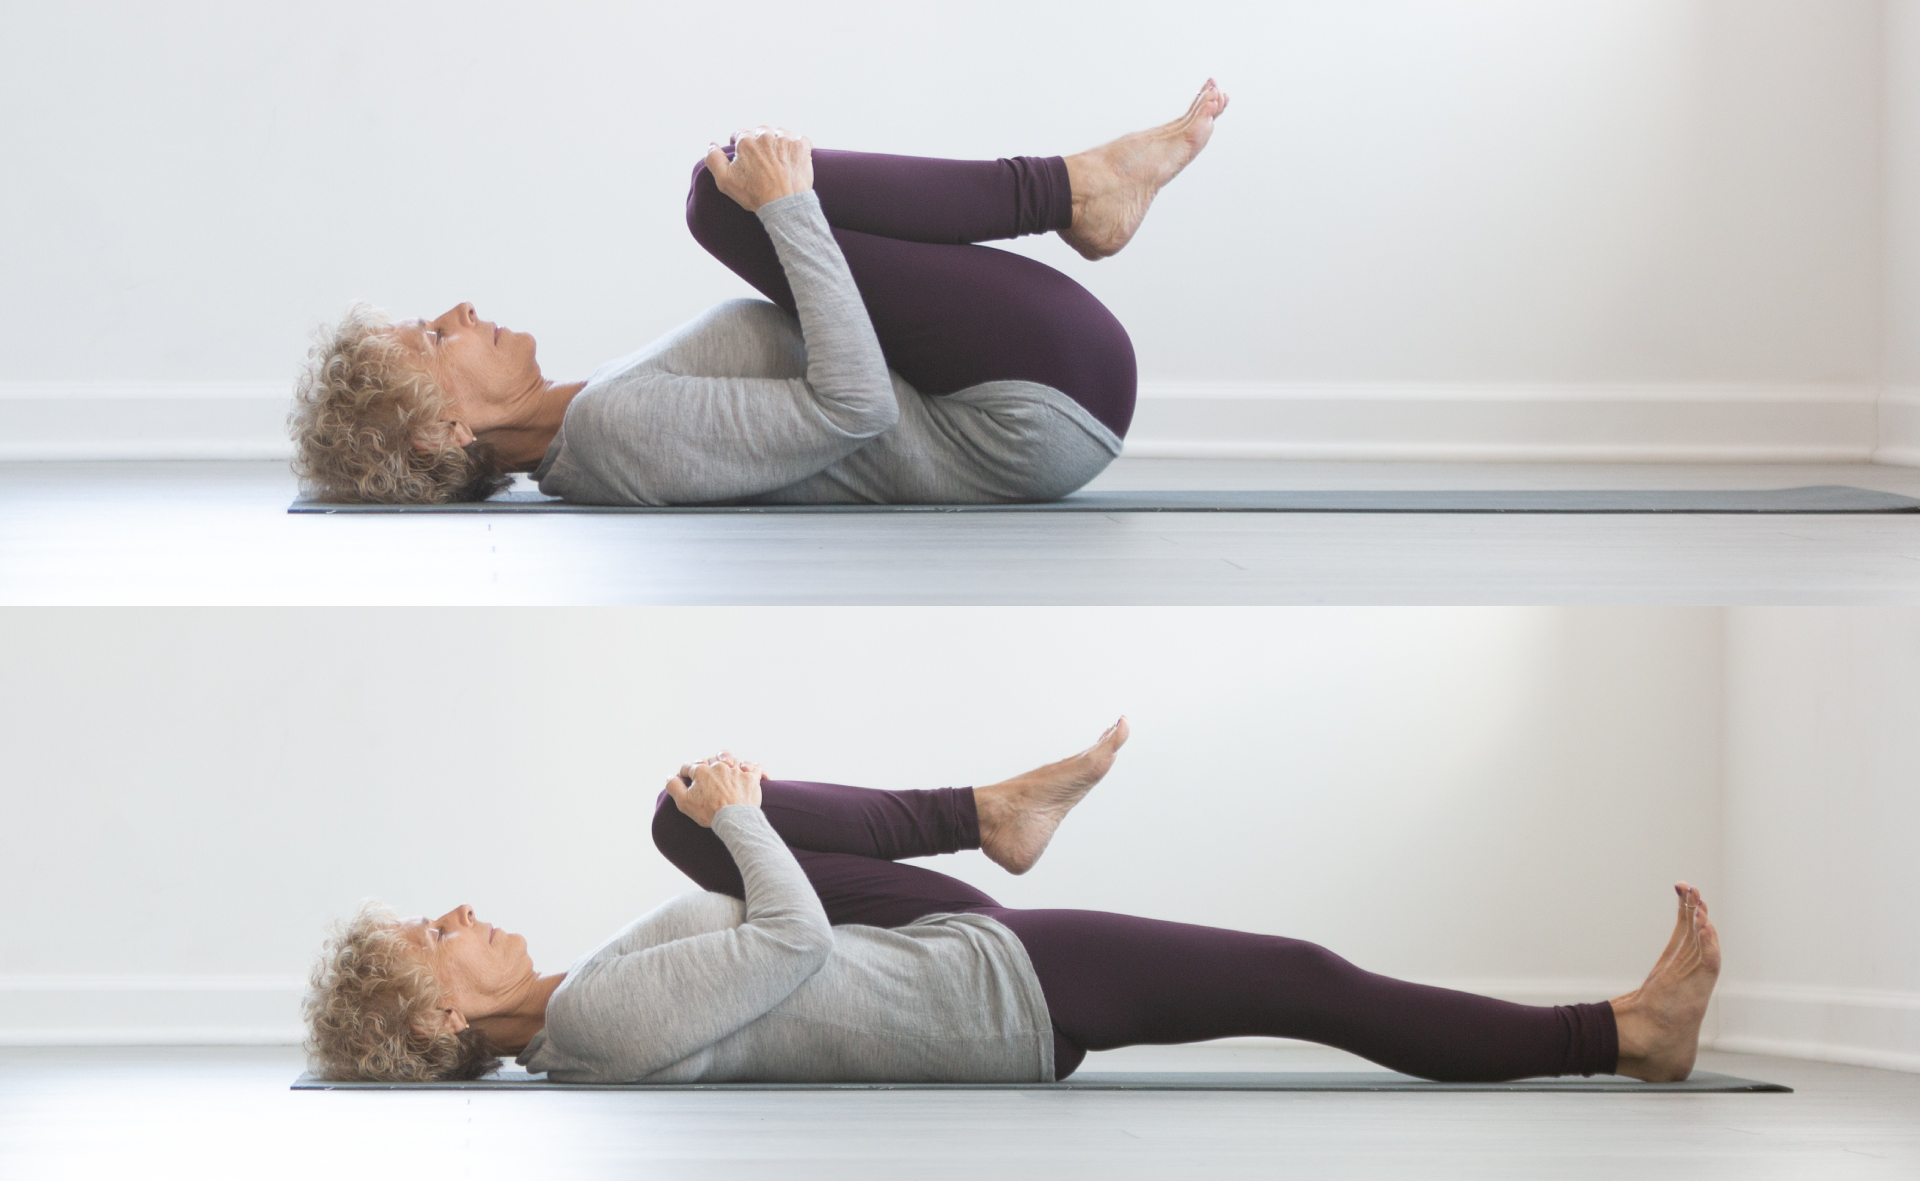 Yoga poses to help ease period pain